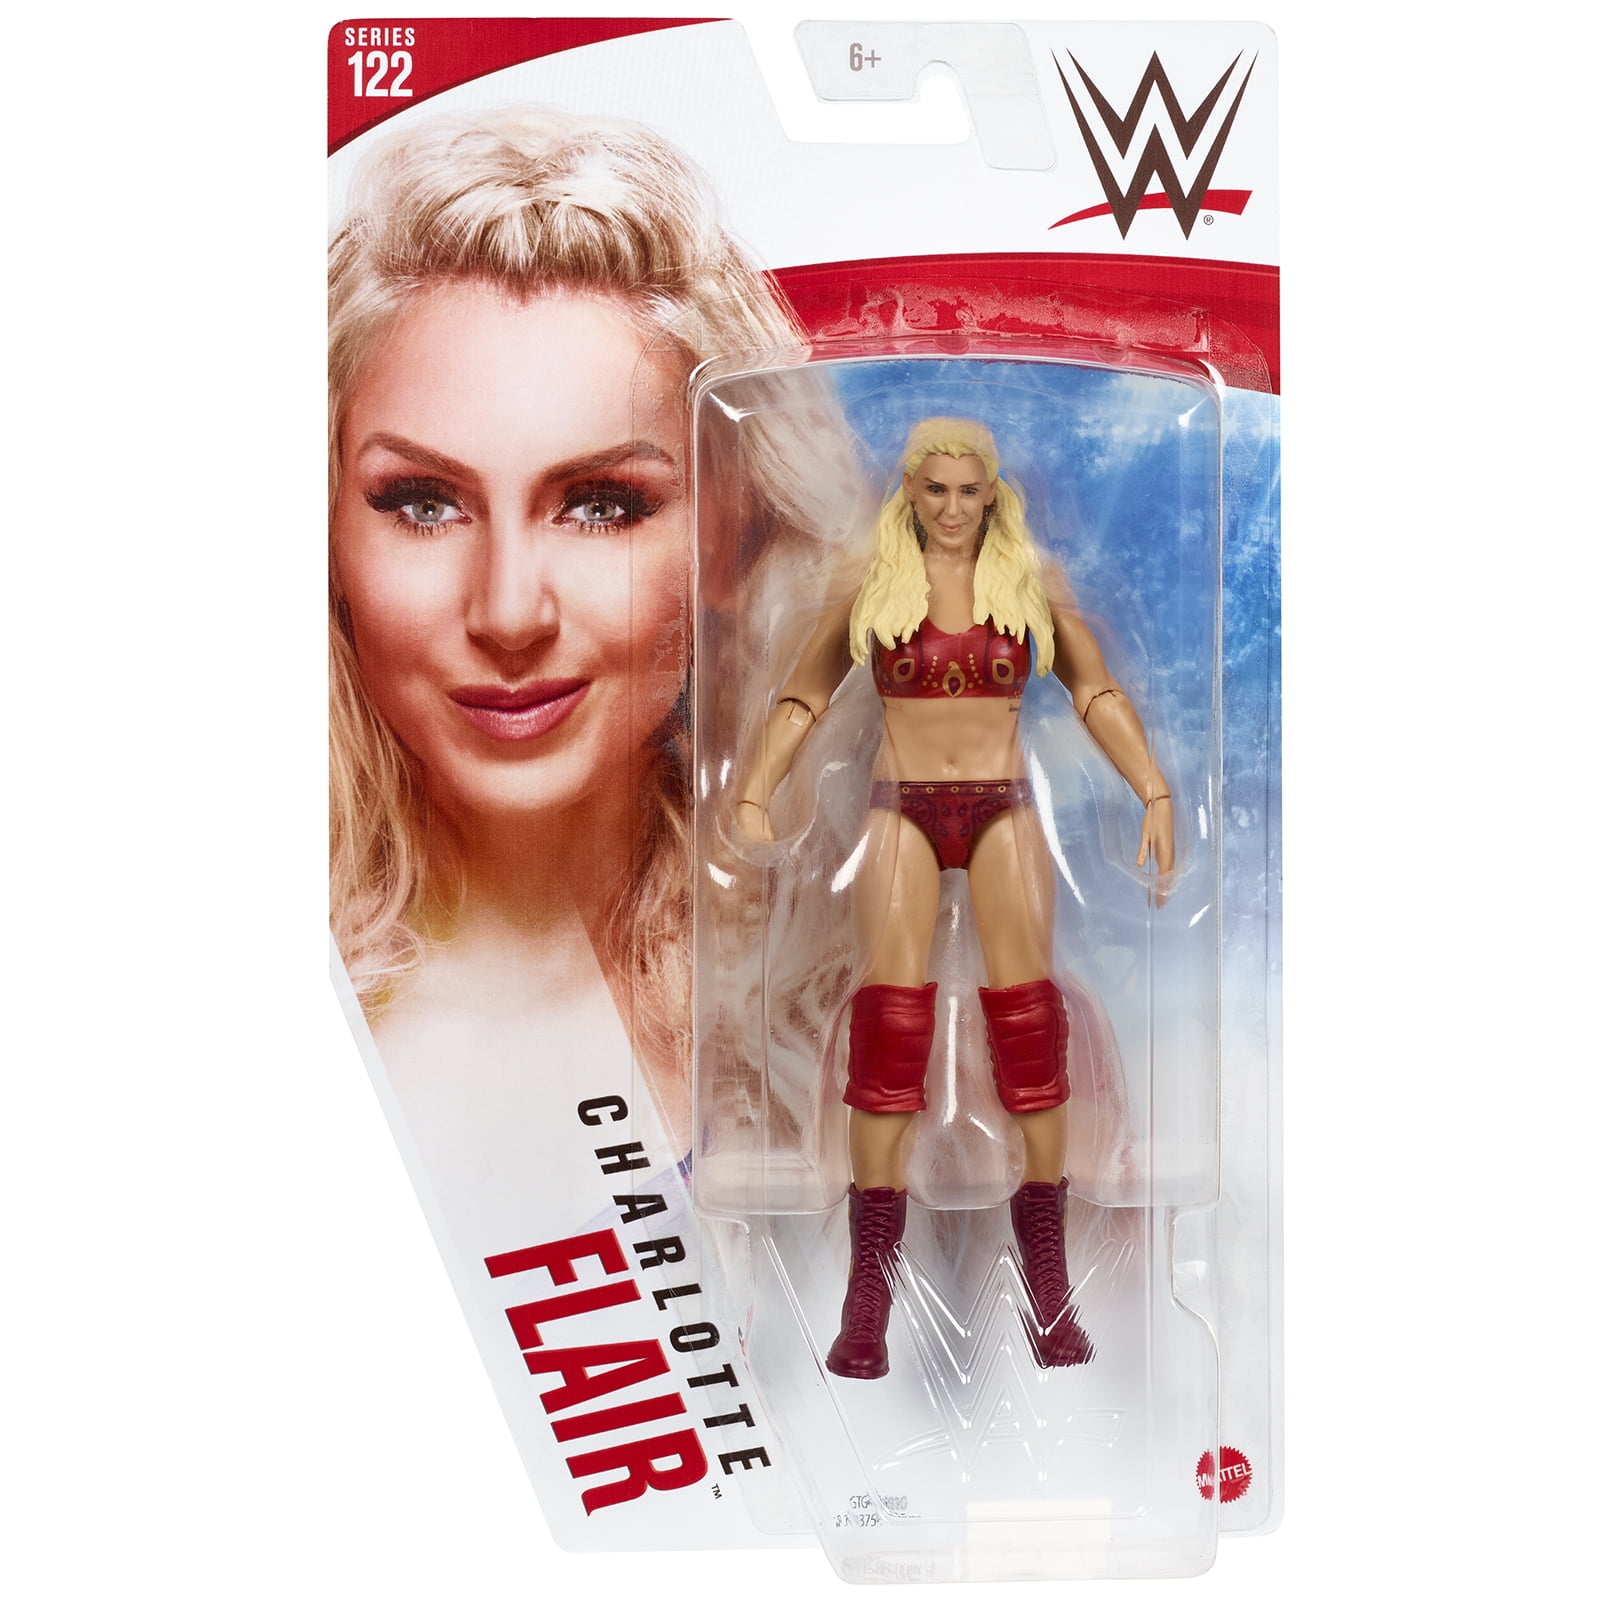 WWE Championship Figurine Collection WWE Charlotte Flair Wrestling Fig' Issue 3 